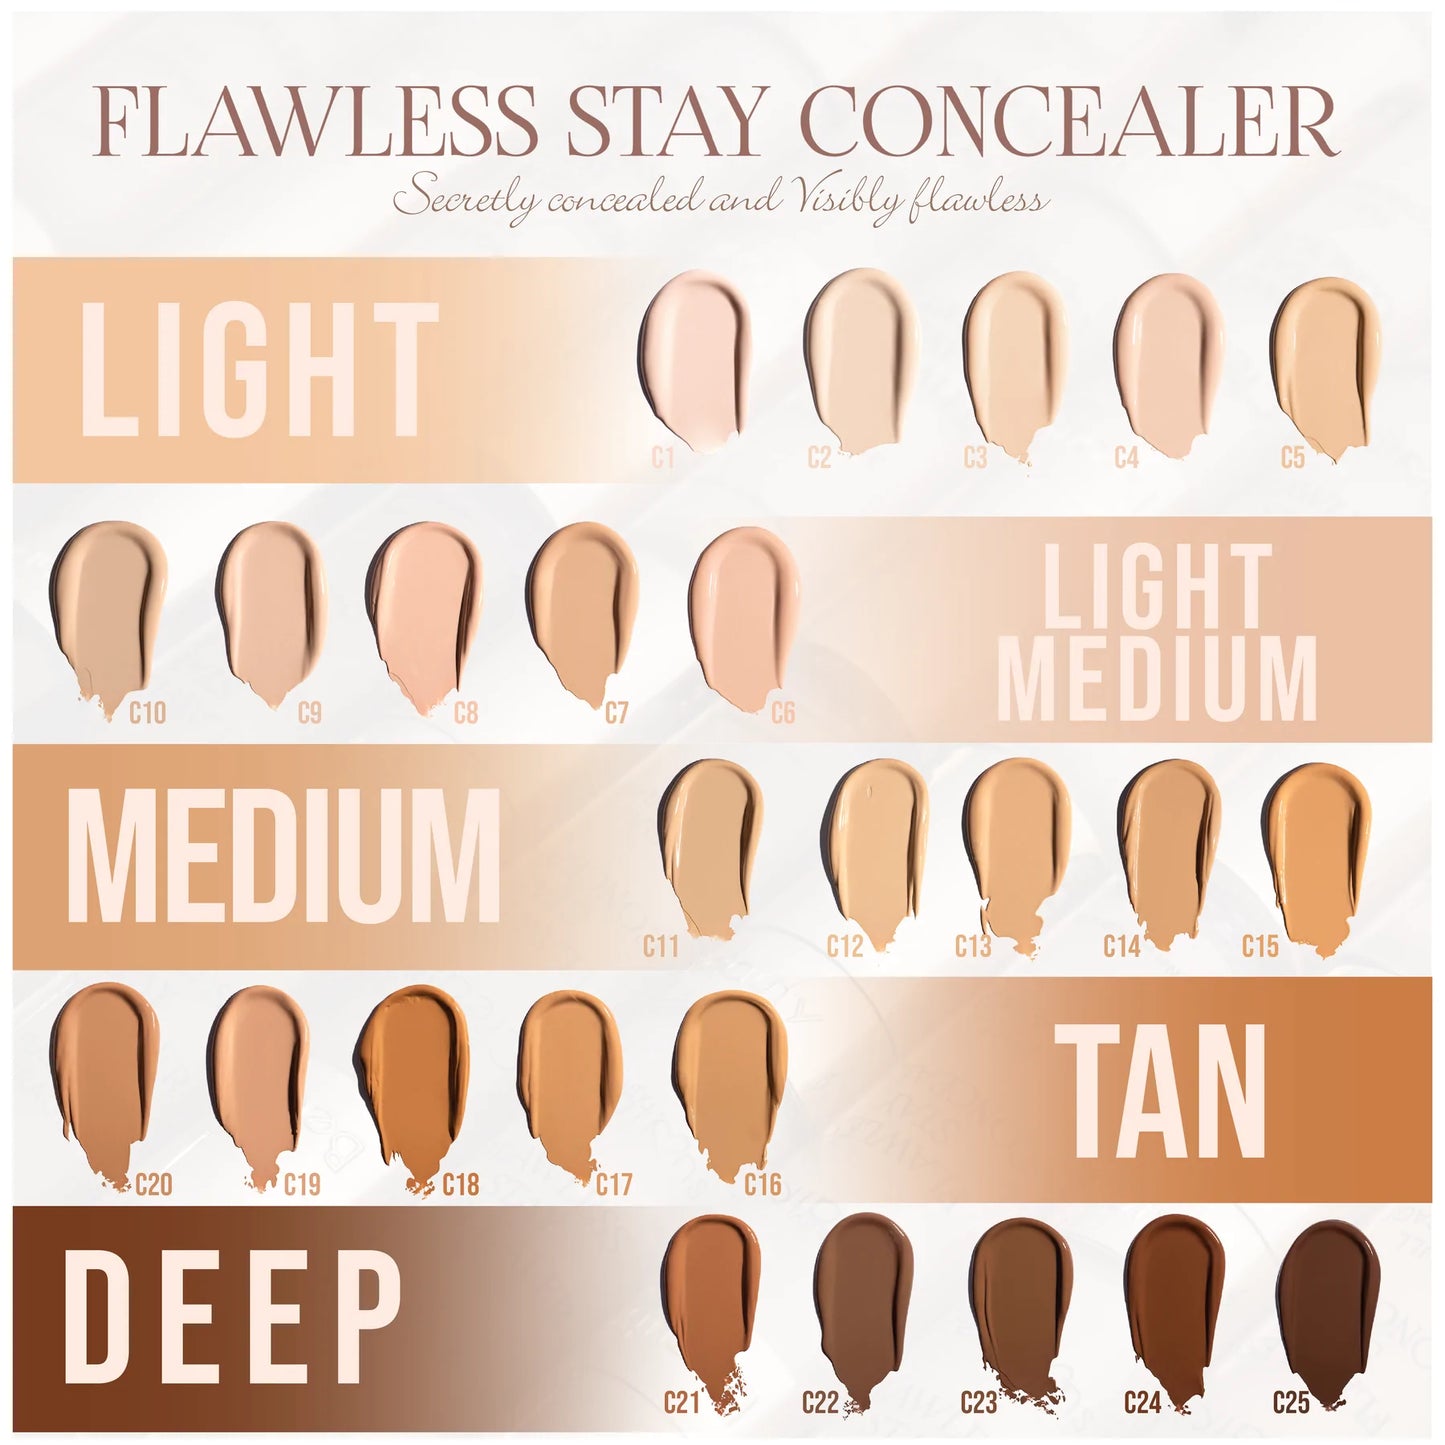 #C22 - Flawless Stay Concealer